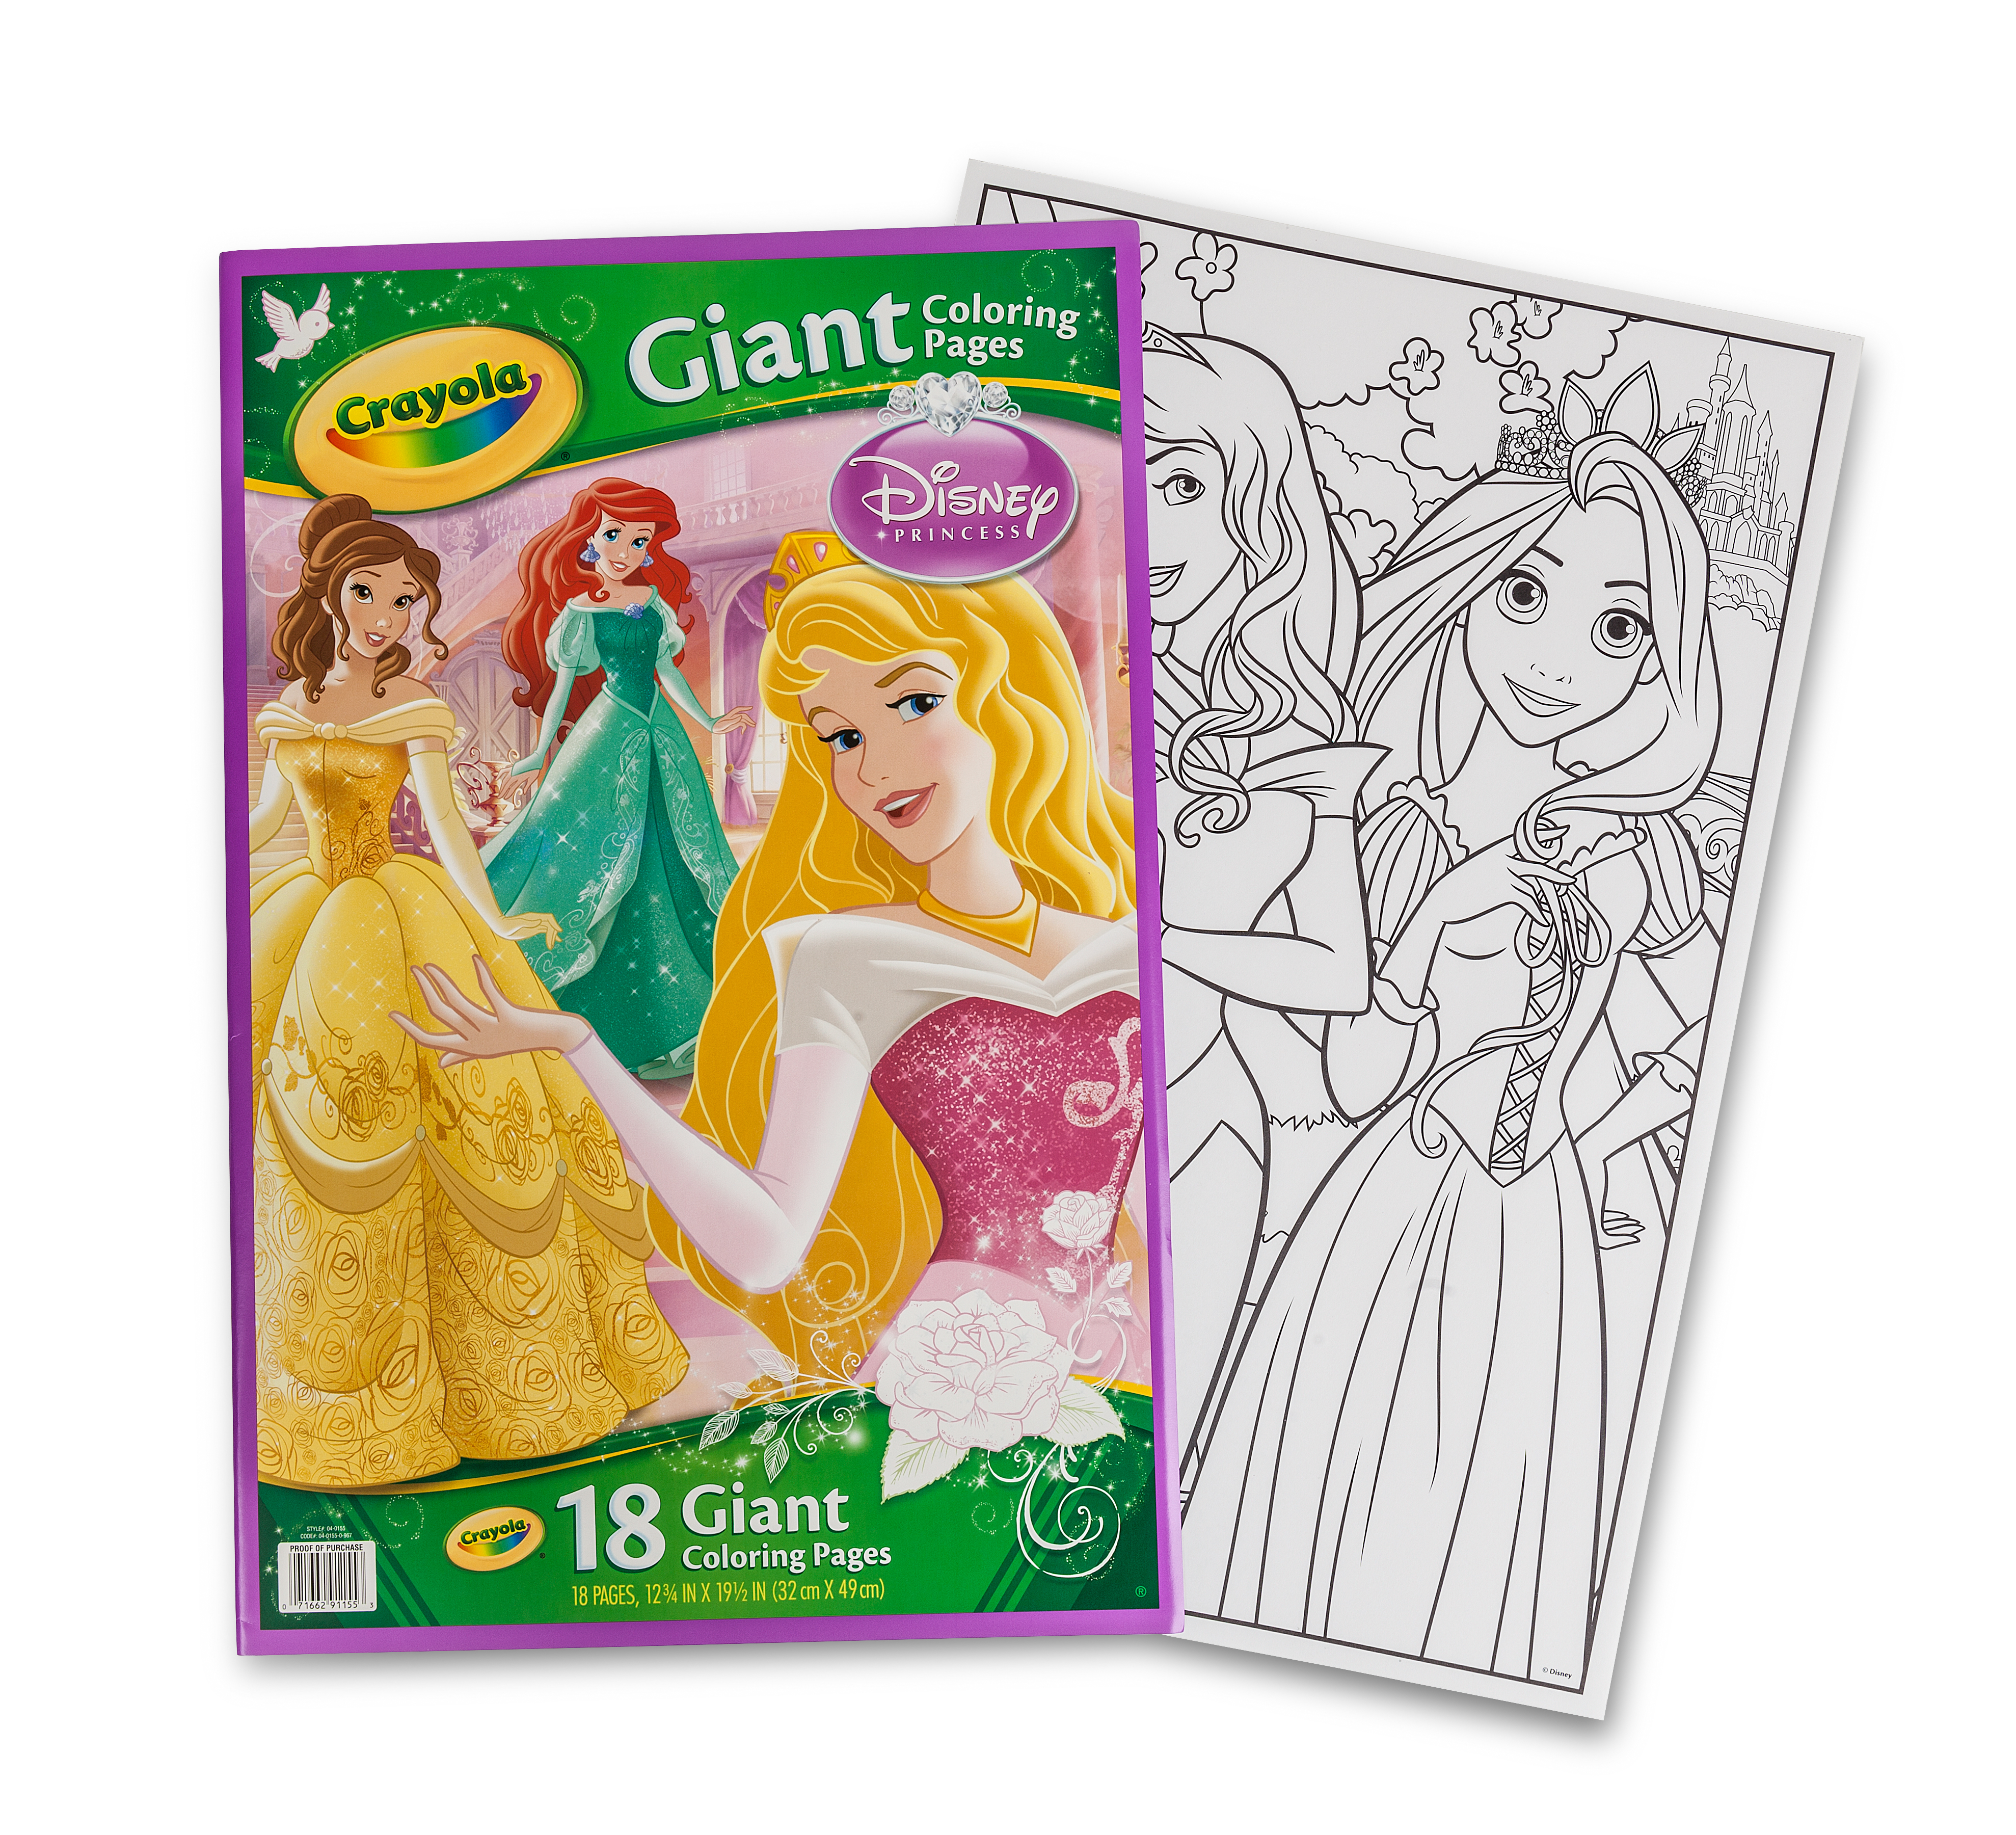 Giant Coloring Pages   Disney Princess   Crayola